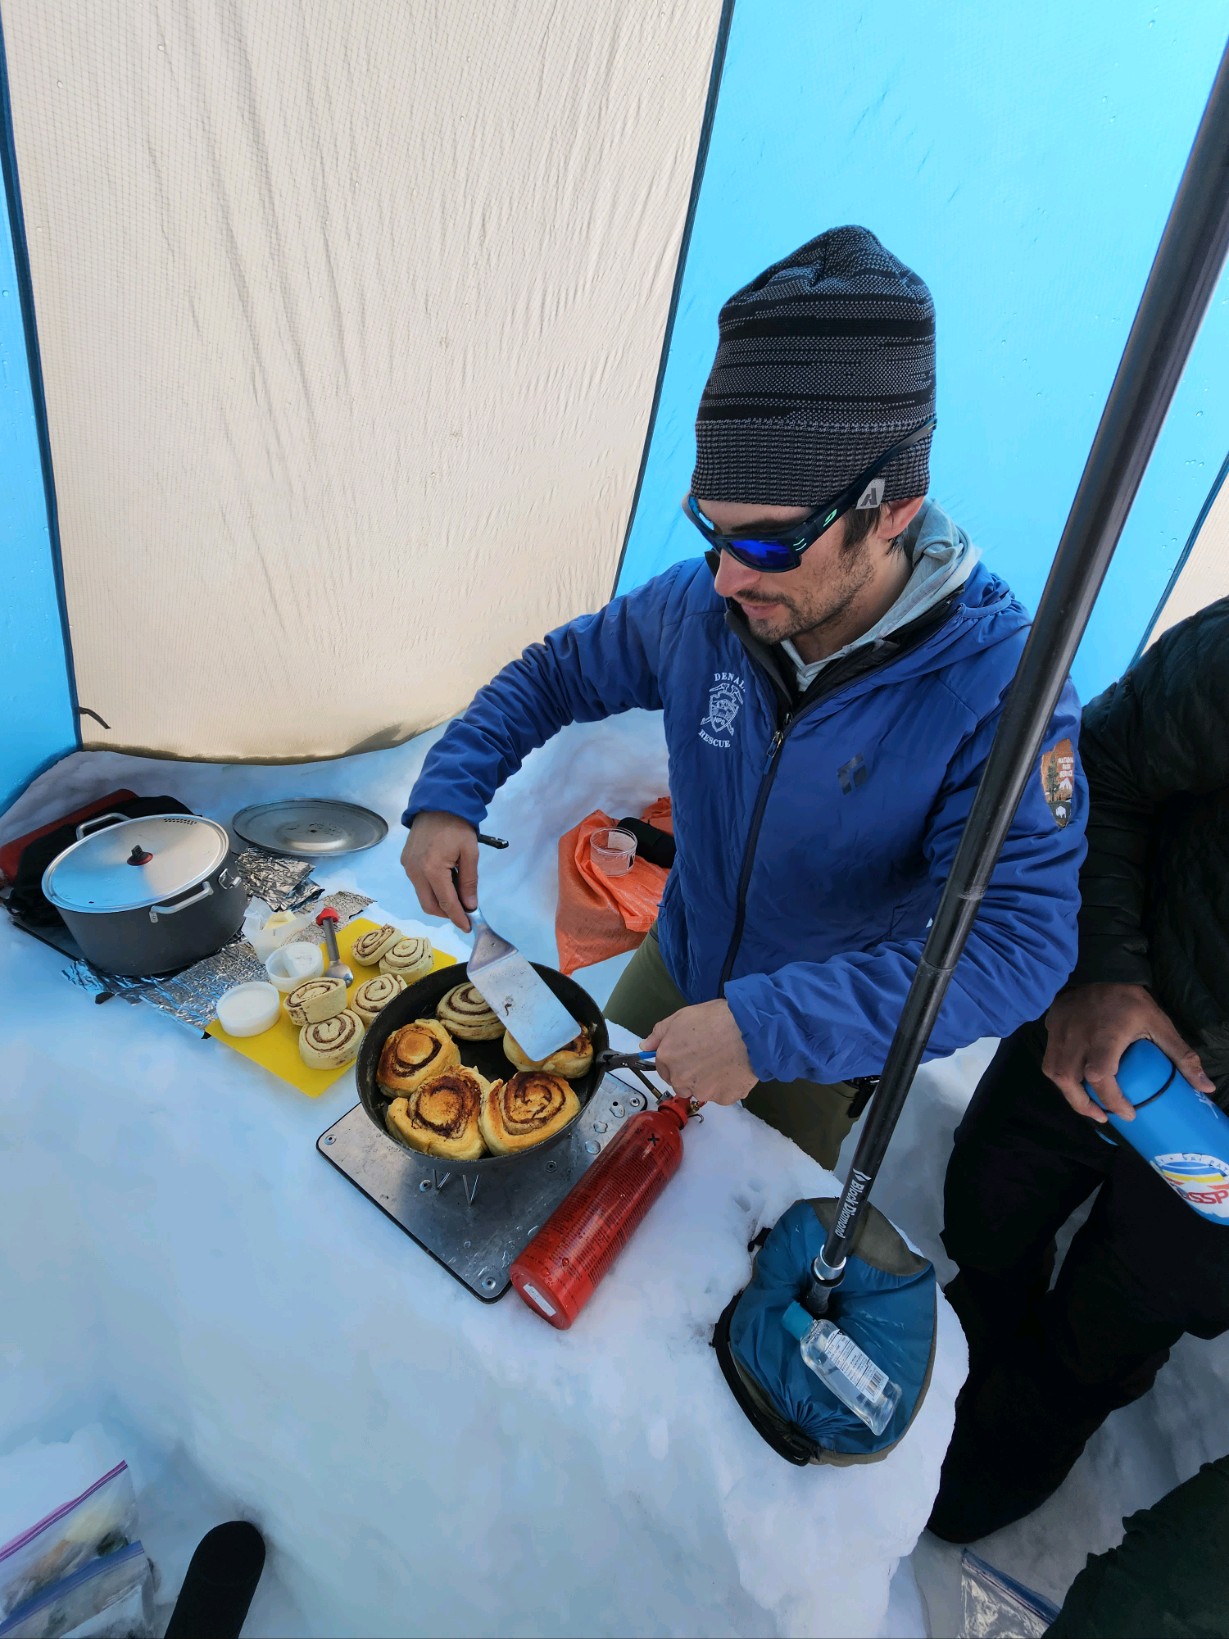 A man in a cooktent prepares cinnamon rolls in a cast iron skillet